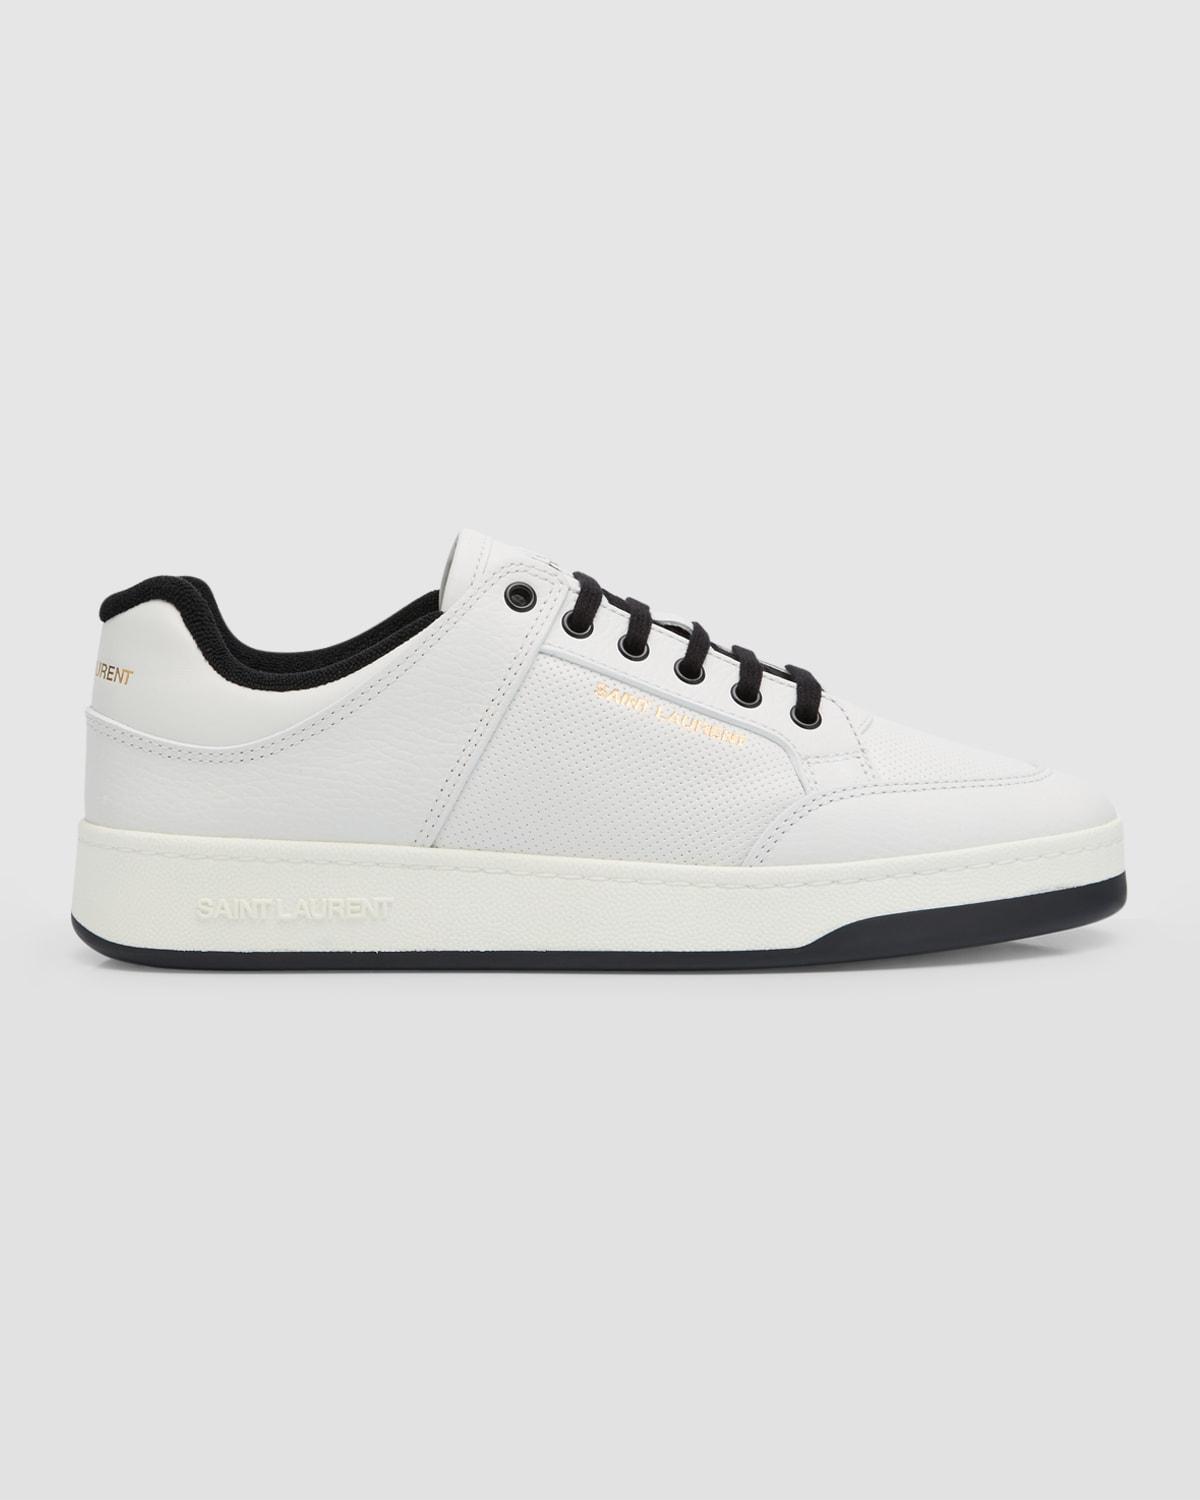 Saint Laurent Sl 6100 Leather Contrast-trim Sneakers in White for Men